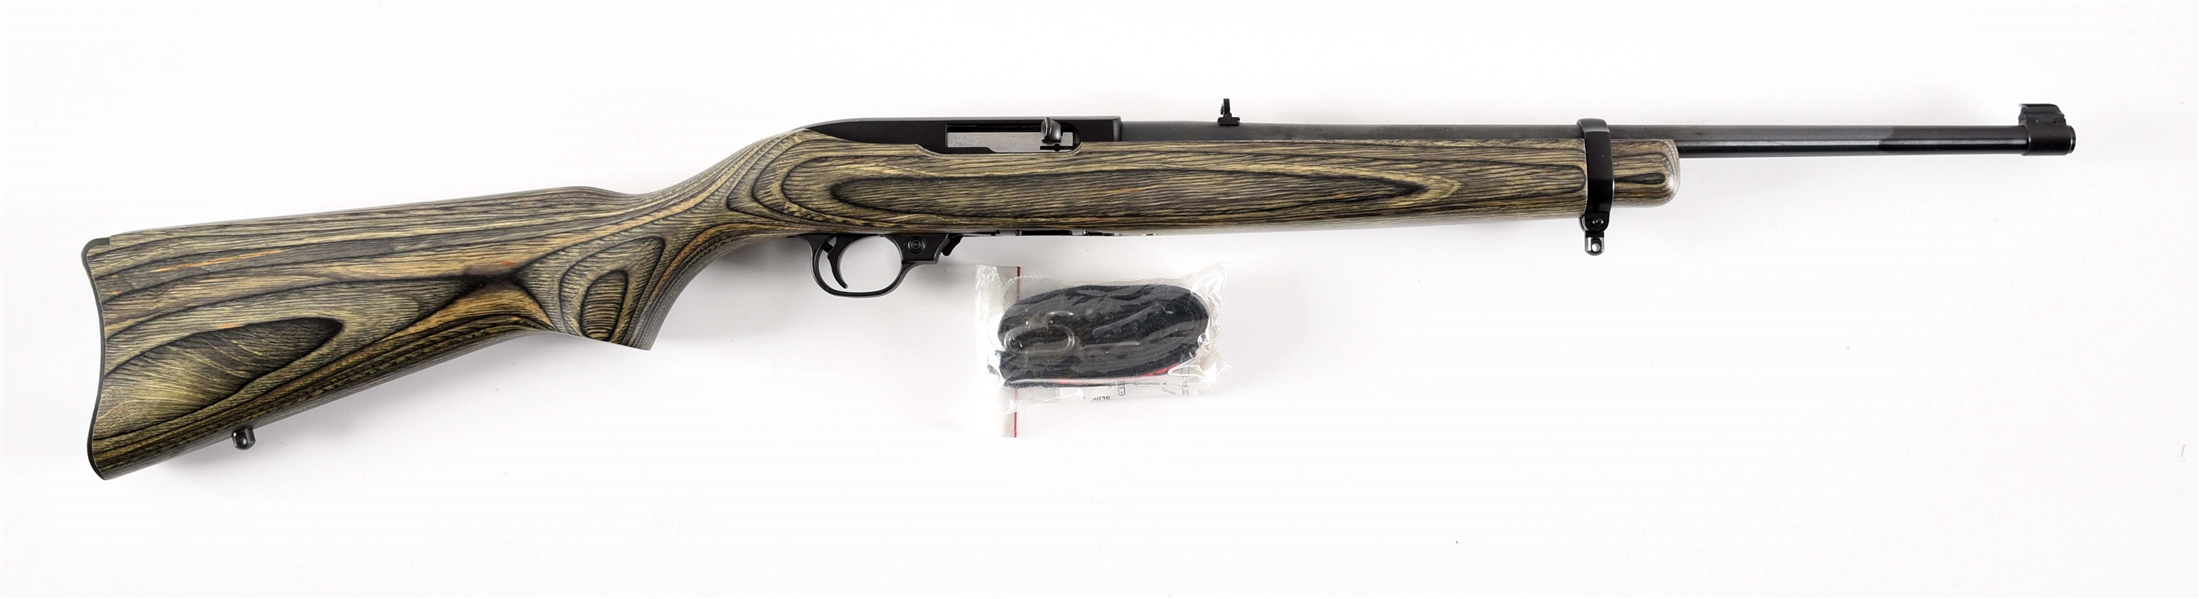 (M) RUGER MODEL 10/22 SEMI-AUTOMATIC RIFLE